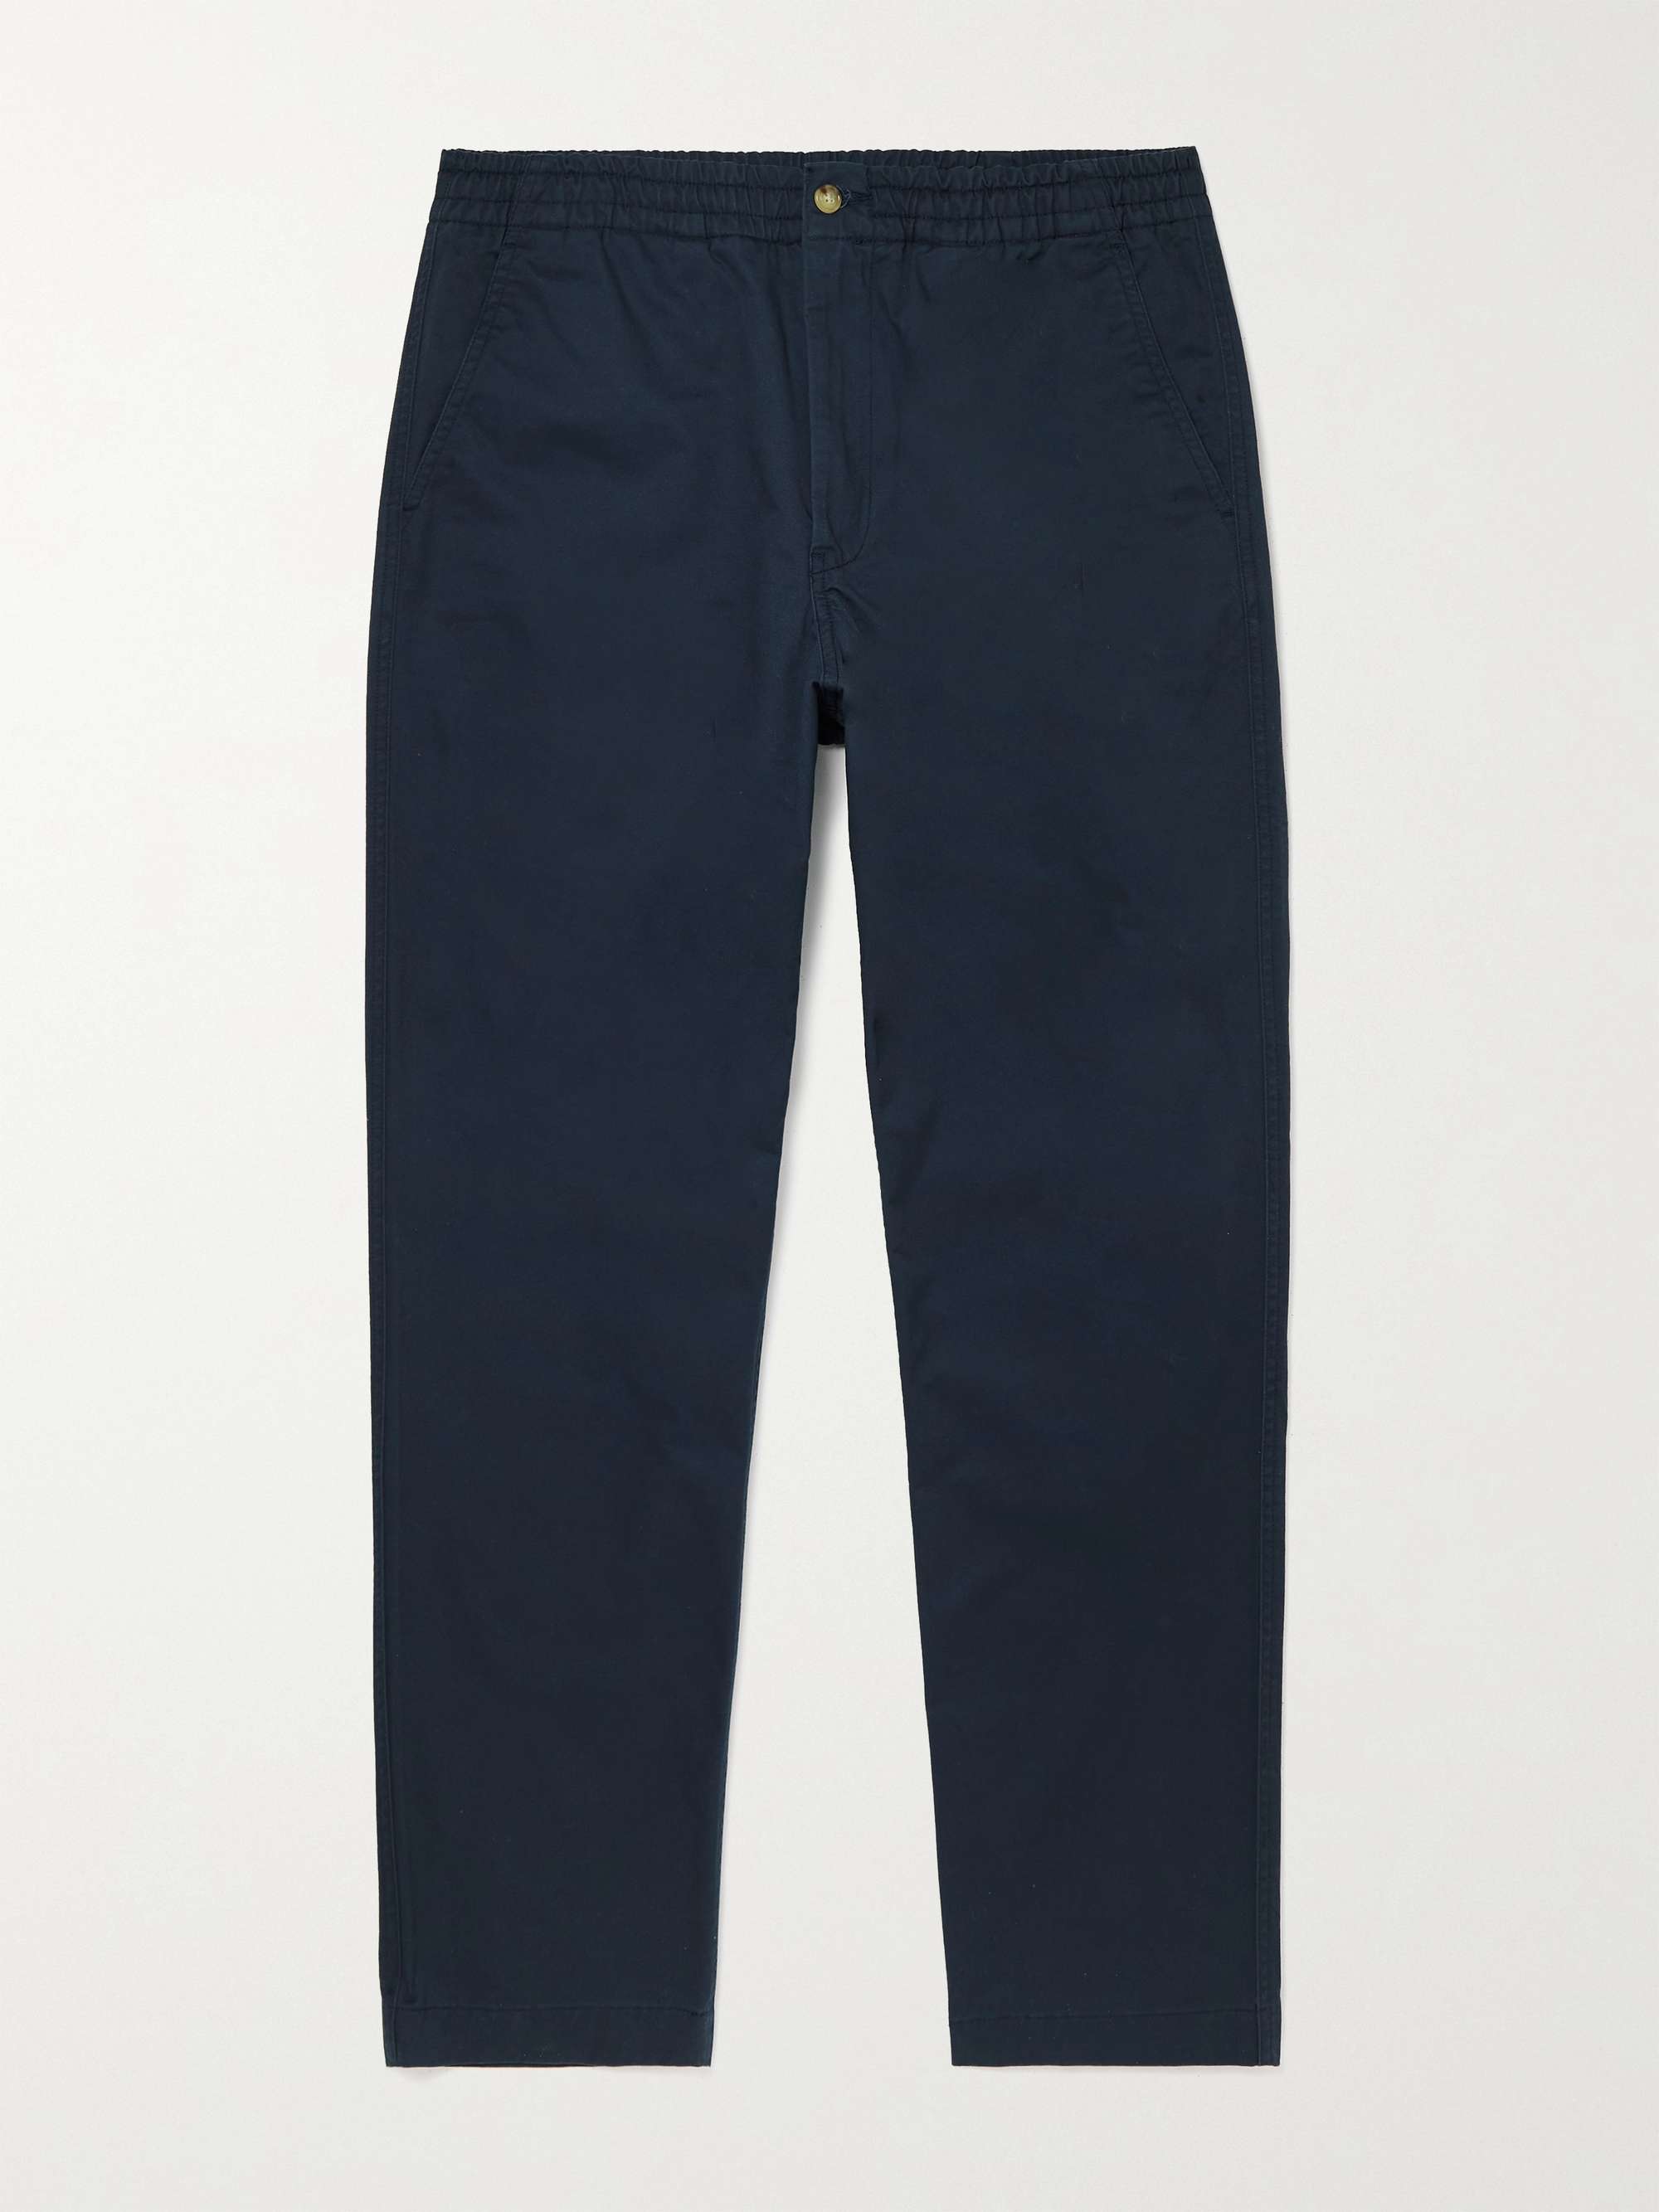 POLO RALPH LAUREN Stretch Cotton-Twill Trousers,Navy